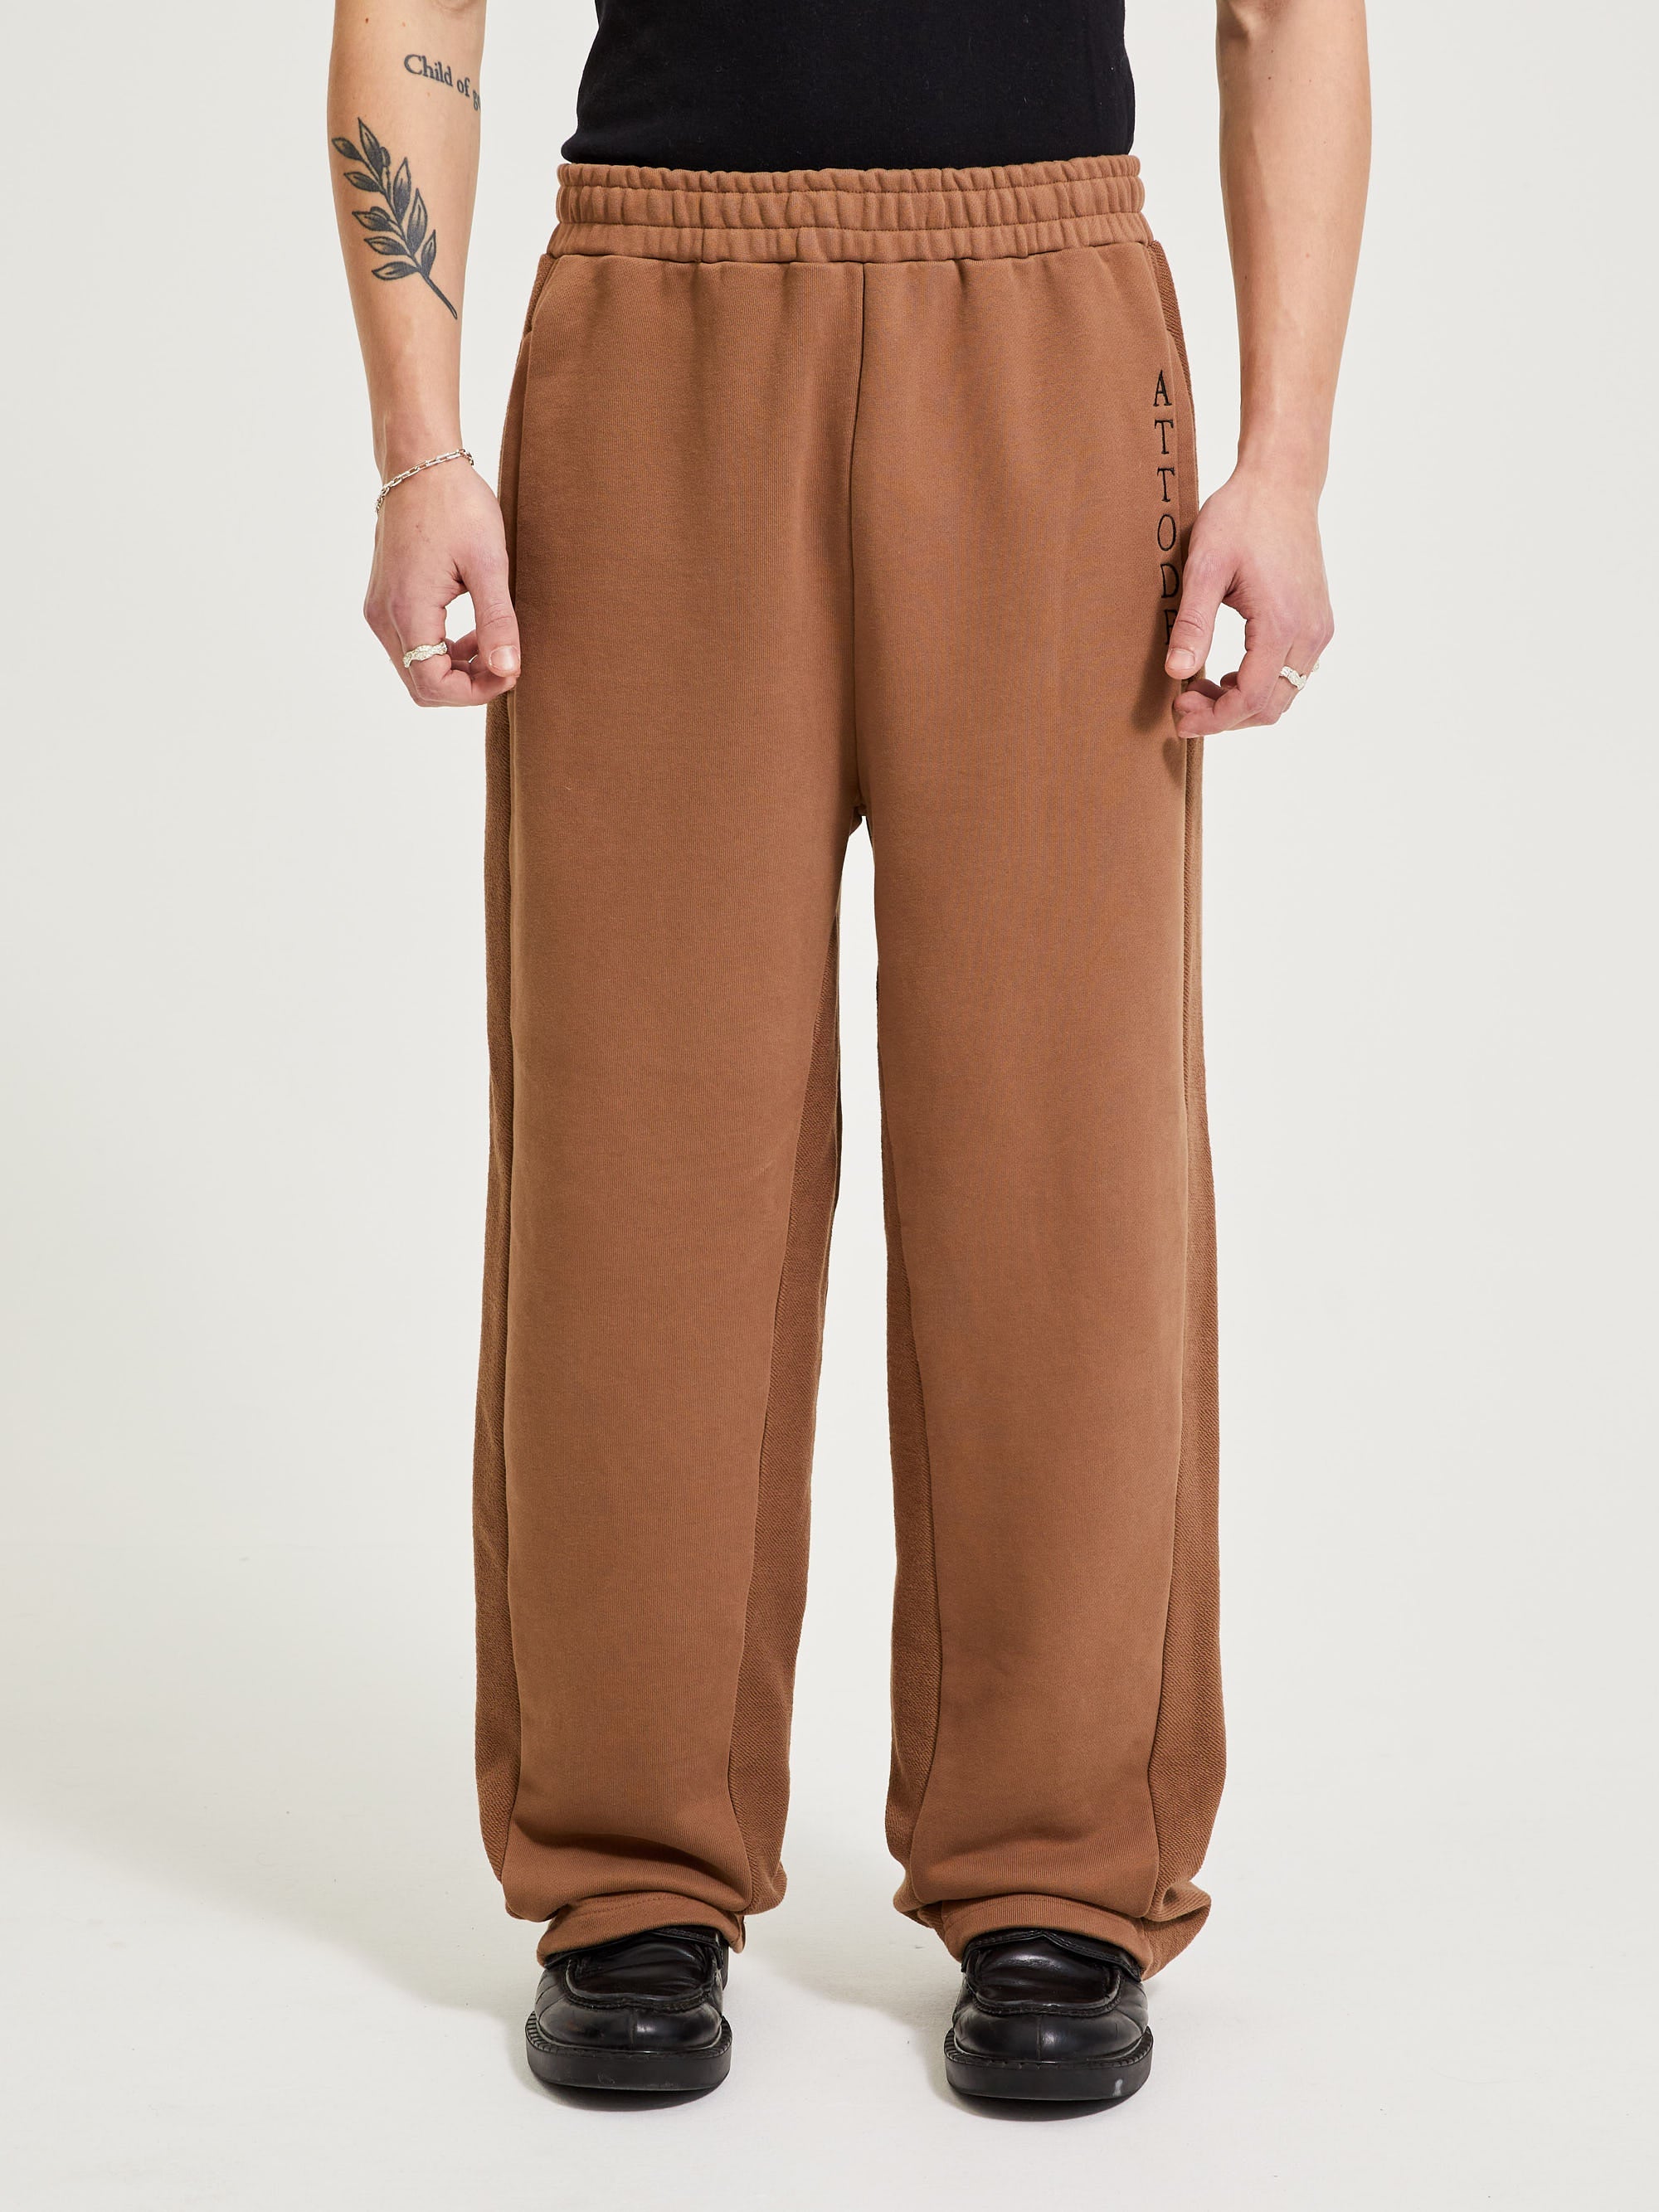 OOB SweatPants – Brown – Out Of Box Shop